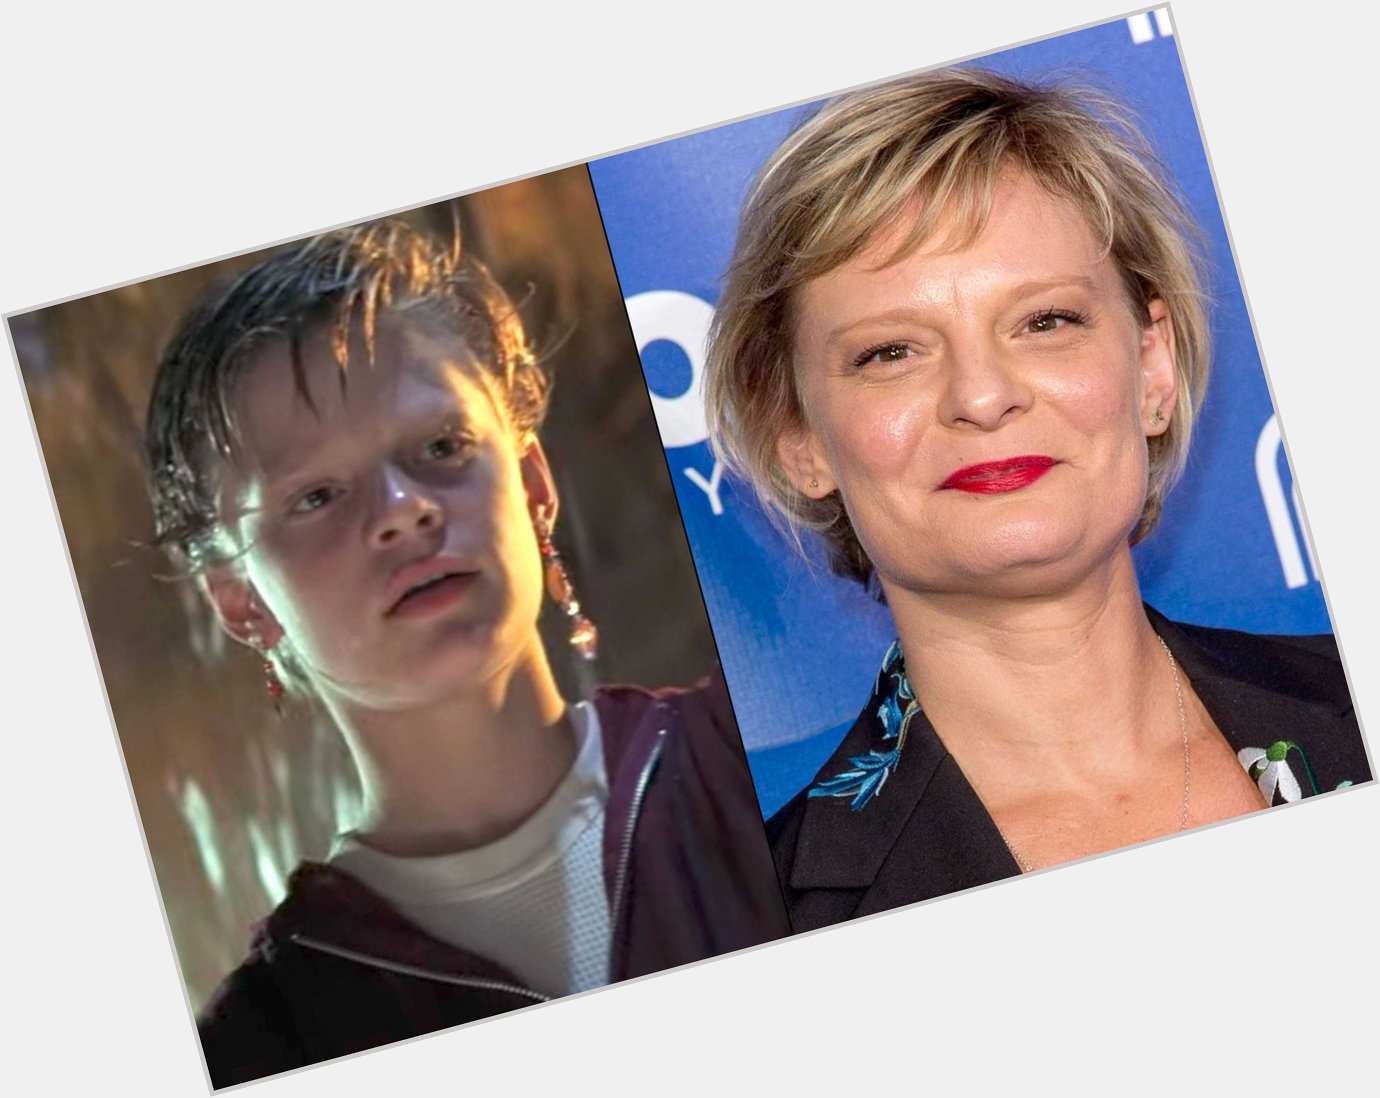 Goonies never say die, but they do say happy birthday to Martha Plimpton, who turns 51 years old today! 